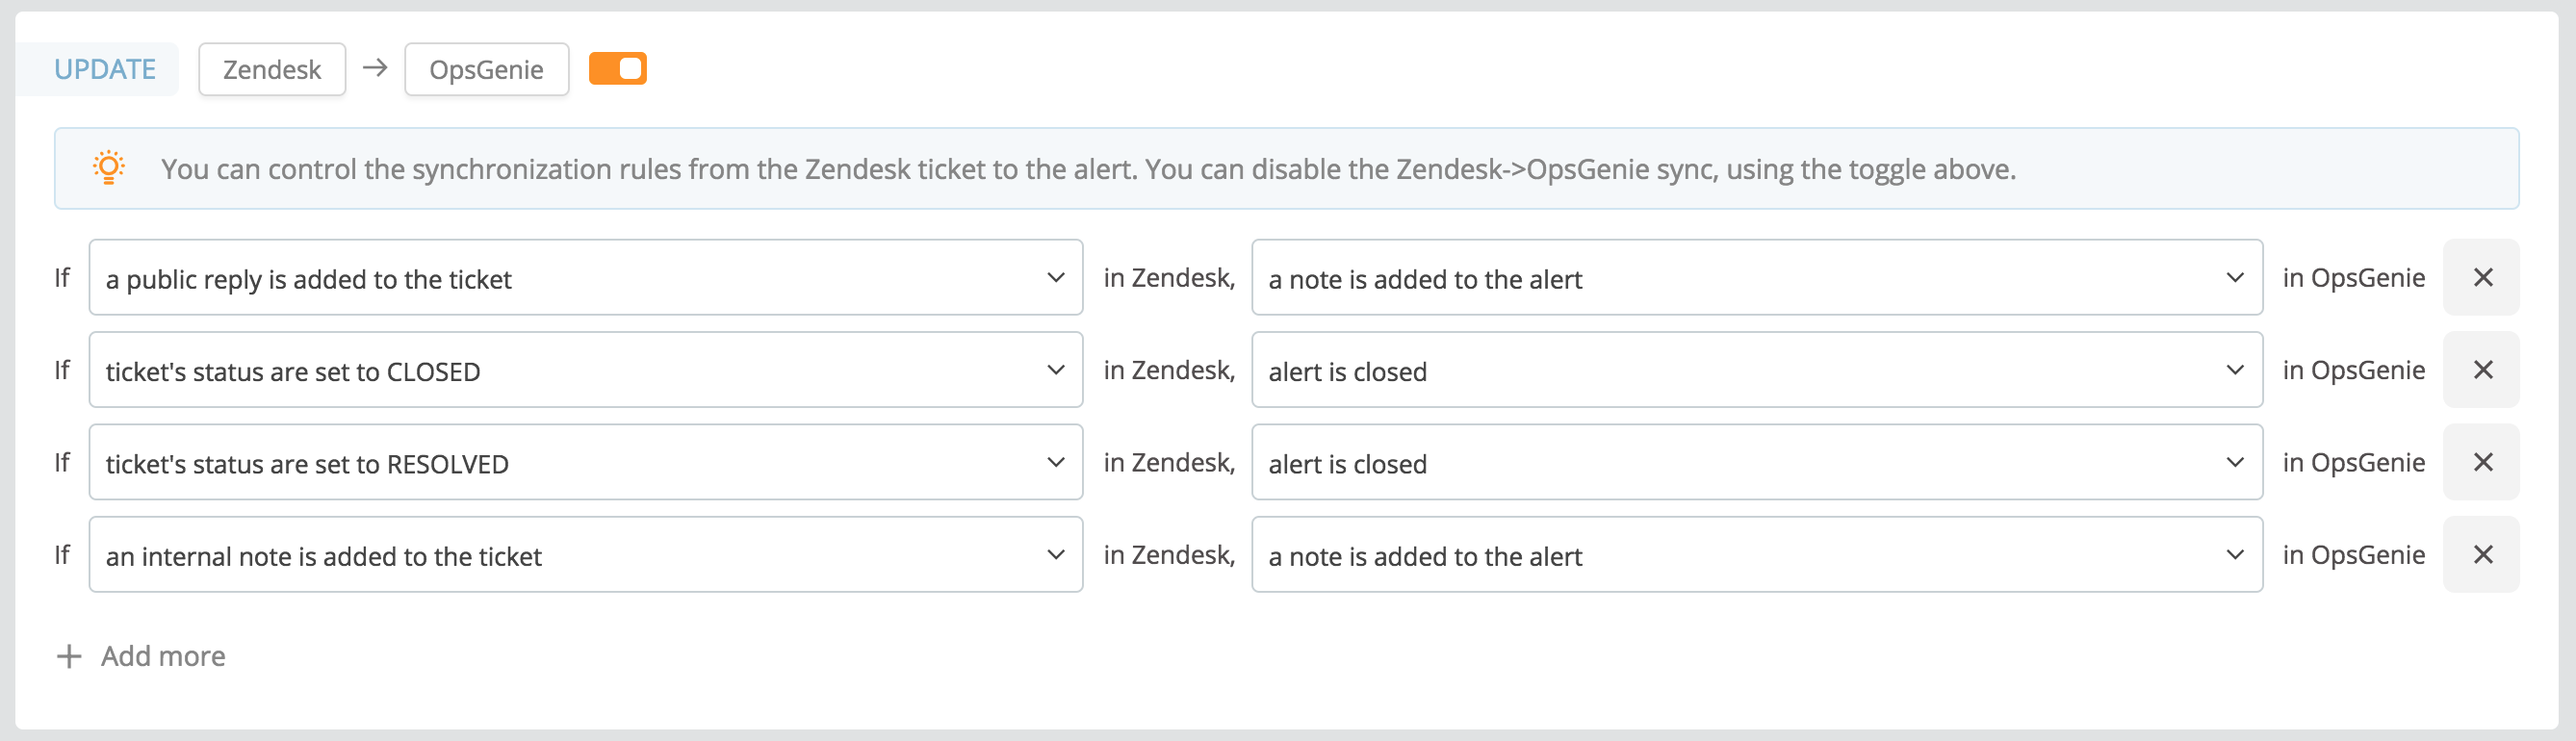 For Zendesk to Opsgenie updates